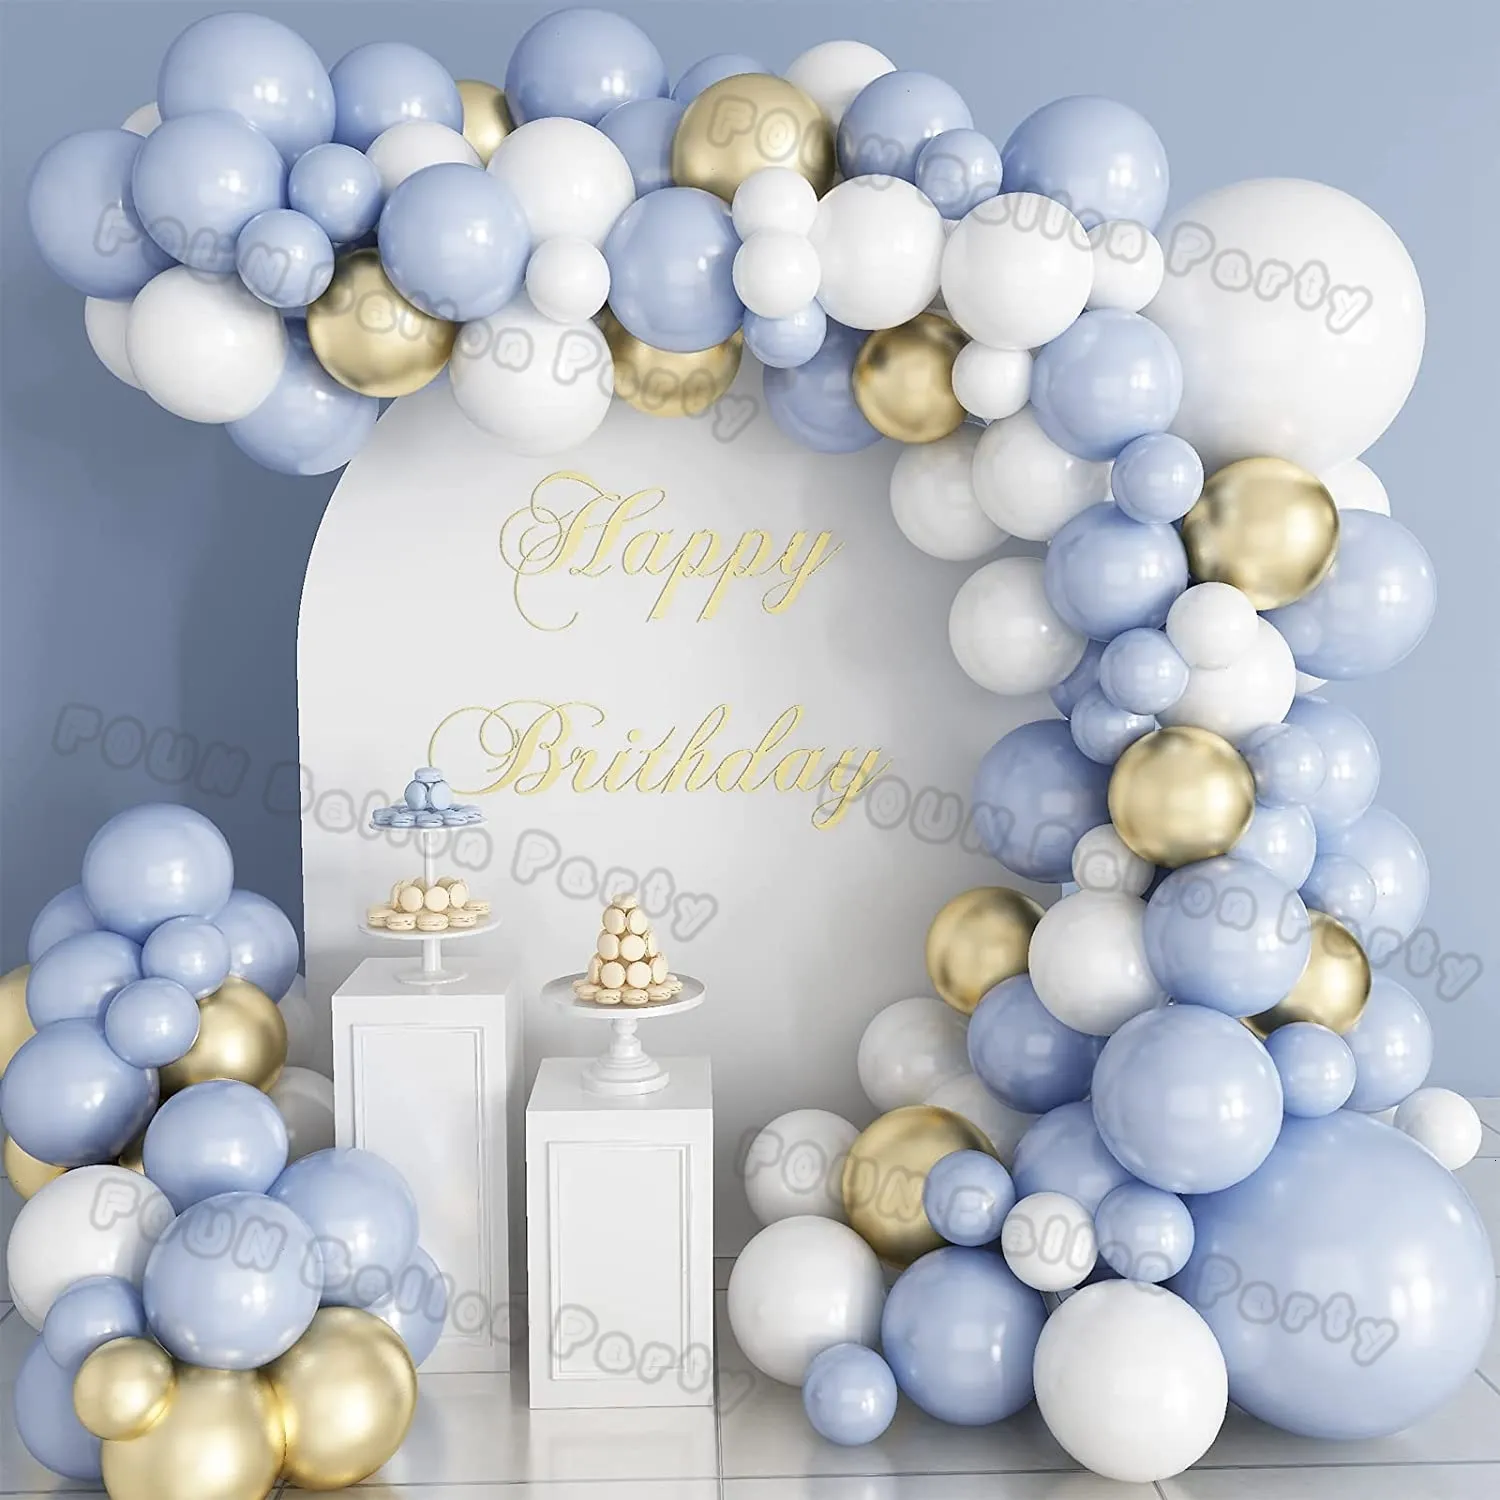 Other Event Party Supplies Blue Metallic Balloon Garland Kit White Gold Confetti Boy Latex Balon Arch Birthday Baby Shower Wedding Party Decorations Globos 230523